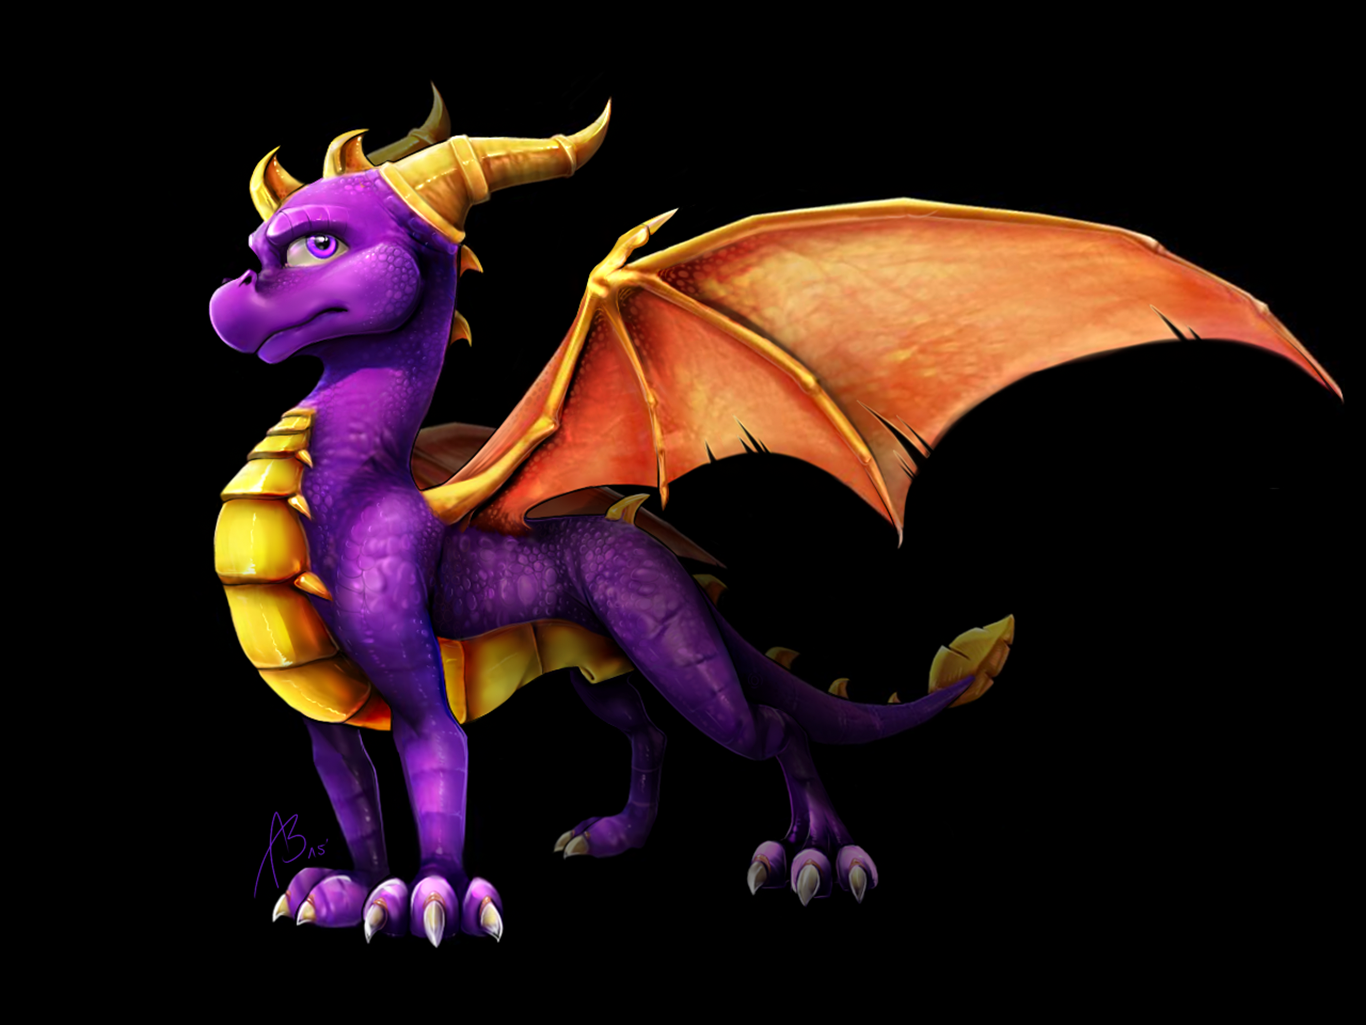 Spyro The Dragon Wallpaper And Background Image 1366x1025.